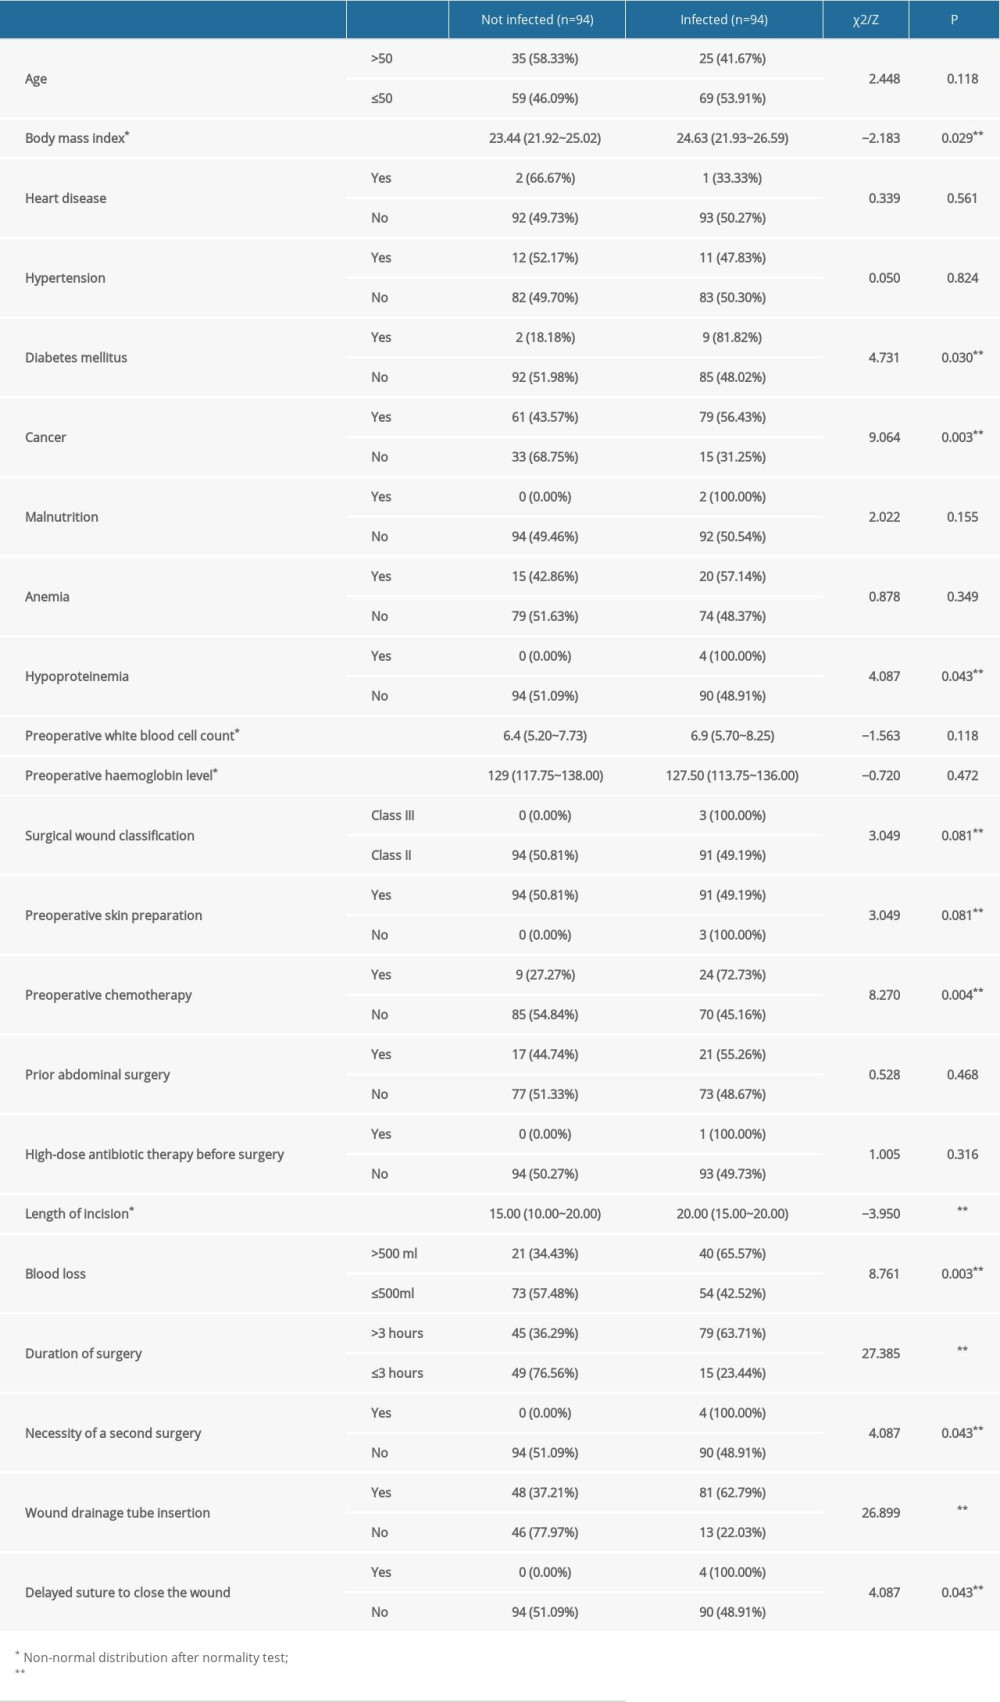 Single-factor analysis of possible high-risk factors for surgical site infections in patients after abdominal hysterectomy.